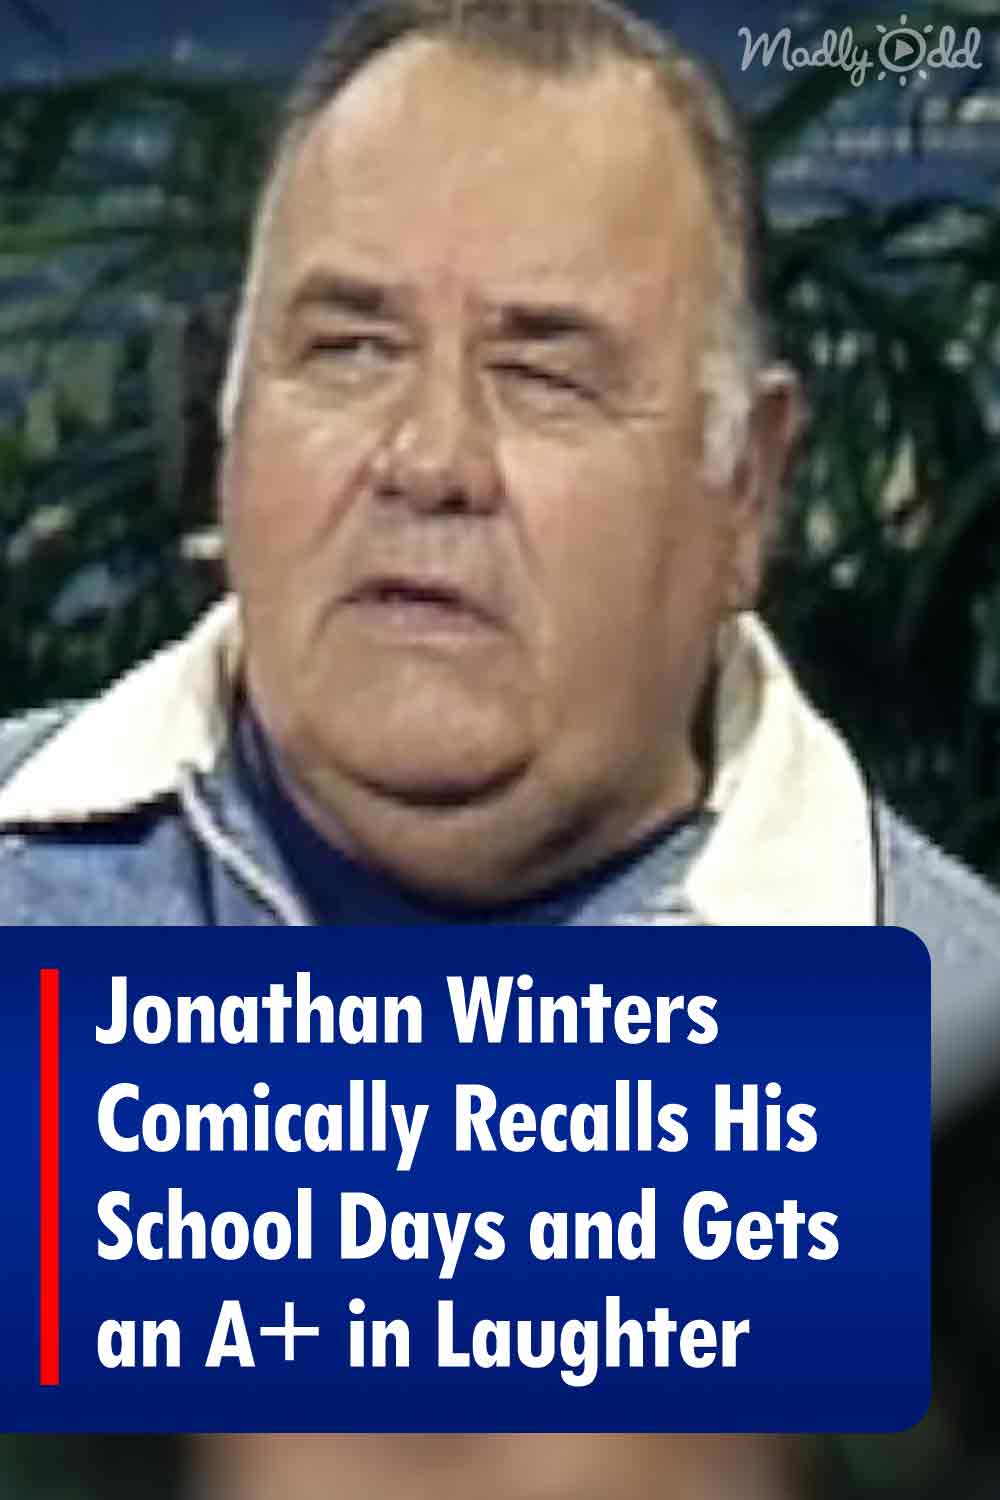 Jonathan Winters Comically Recalls His School Days and Gets an A+ in Laughter